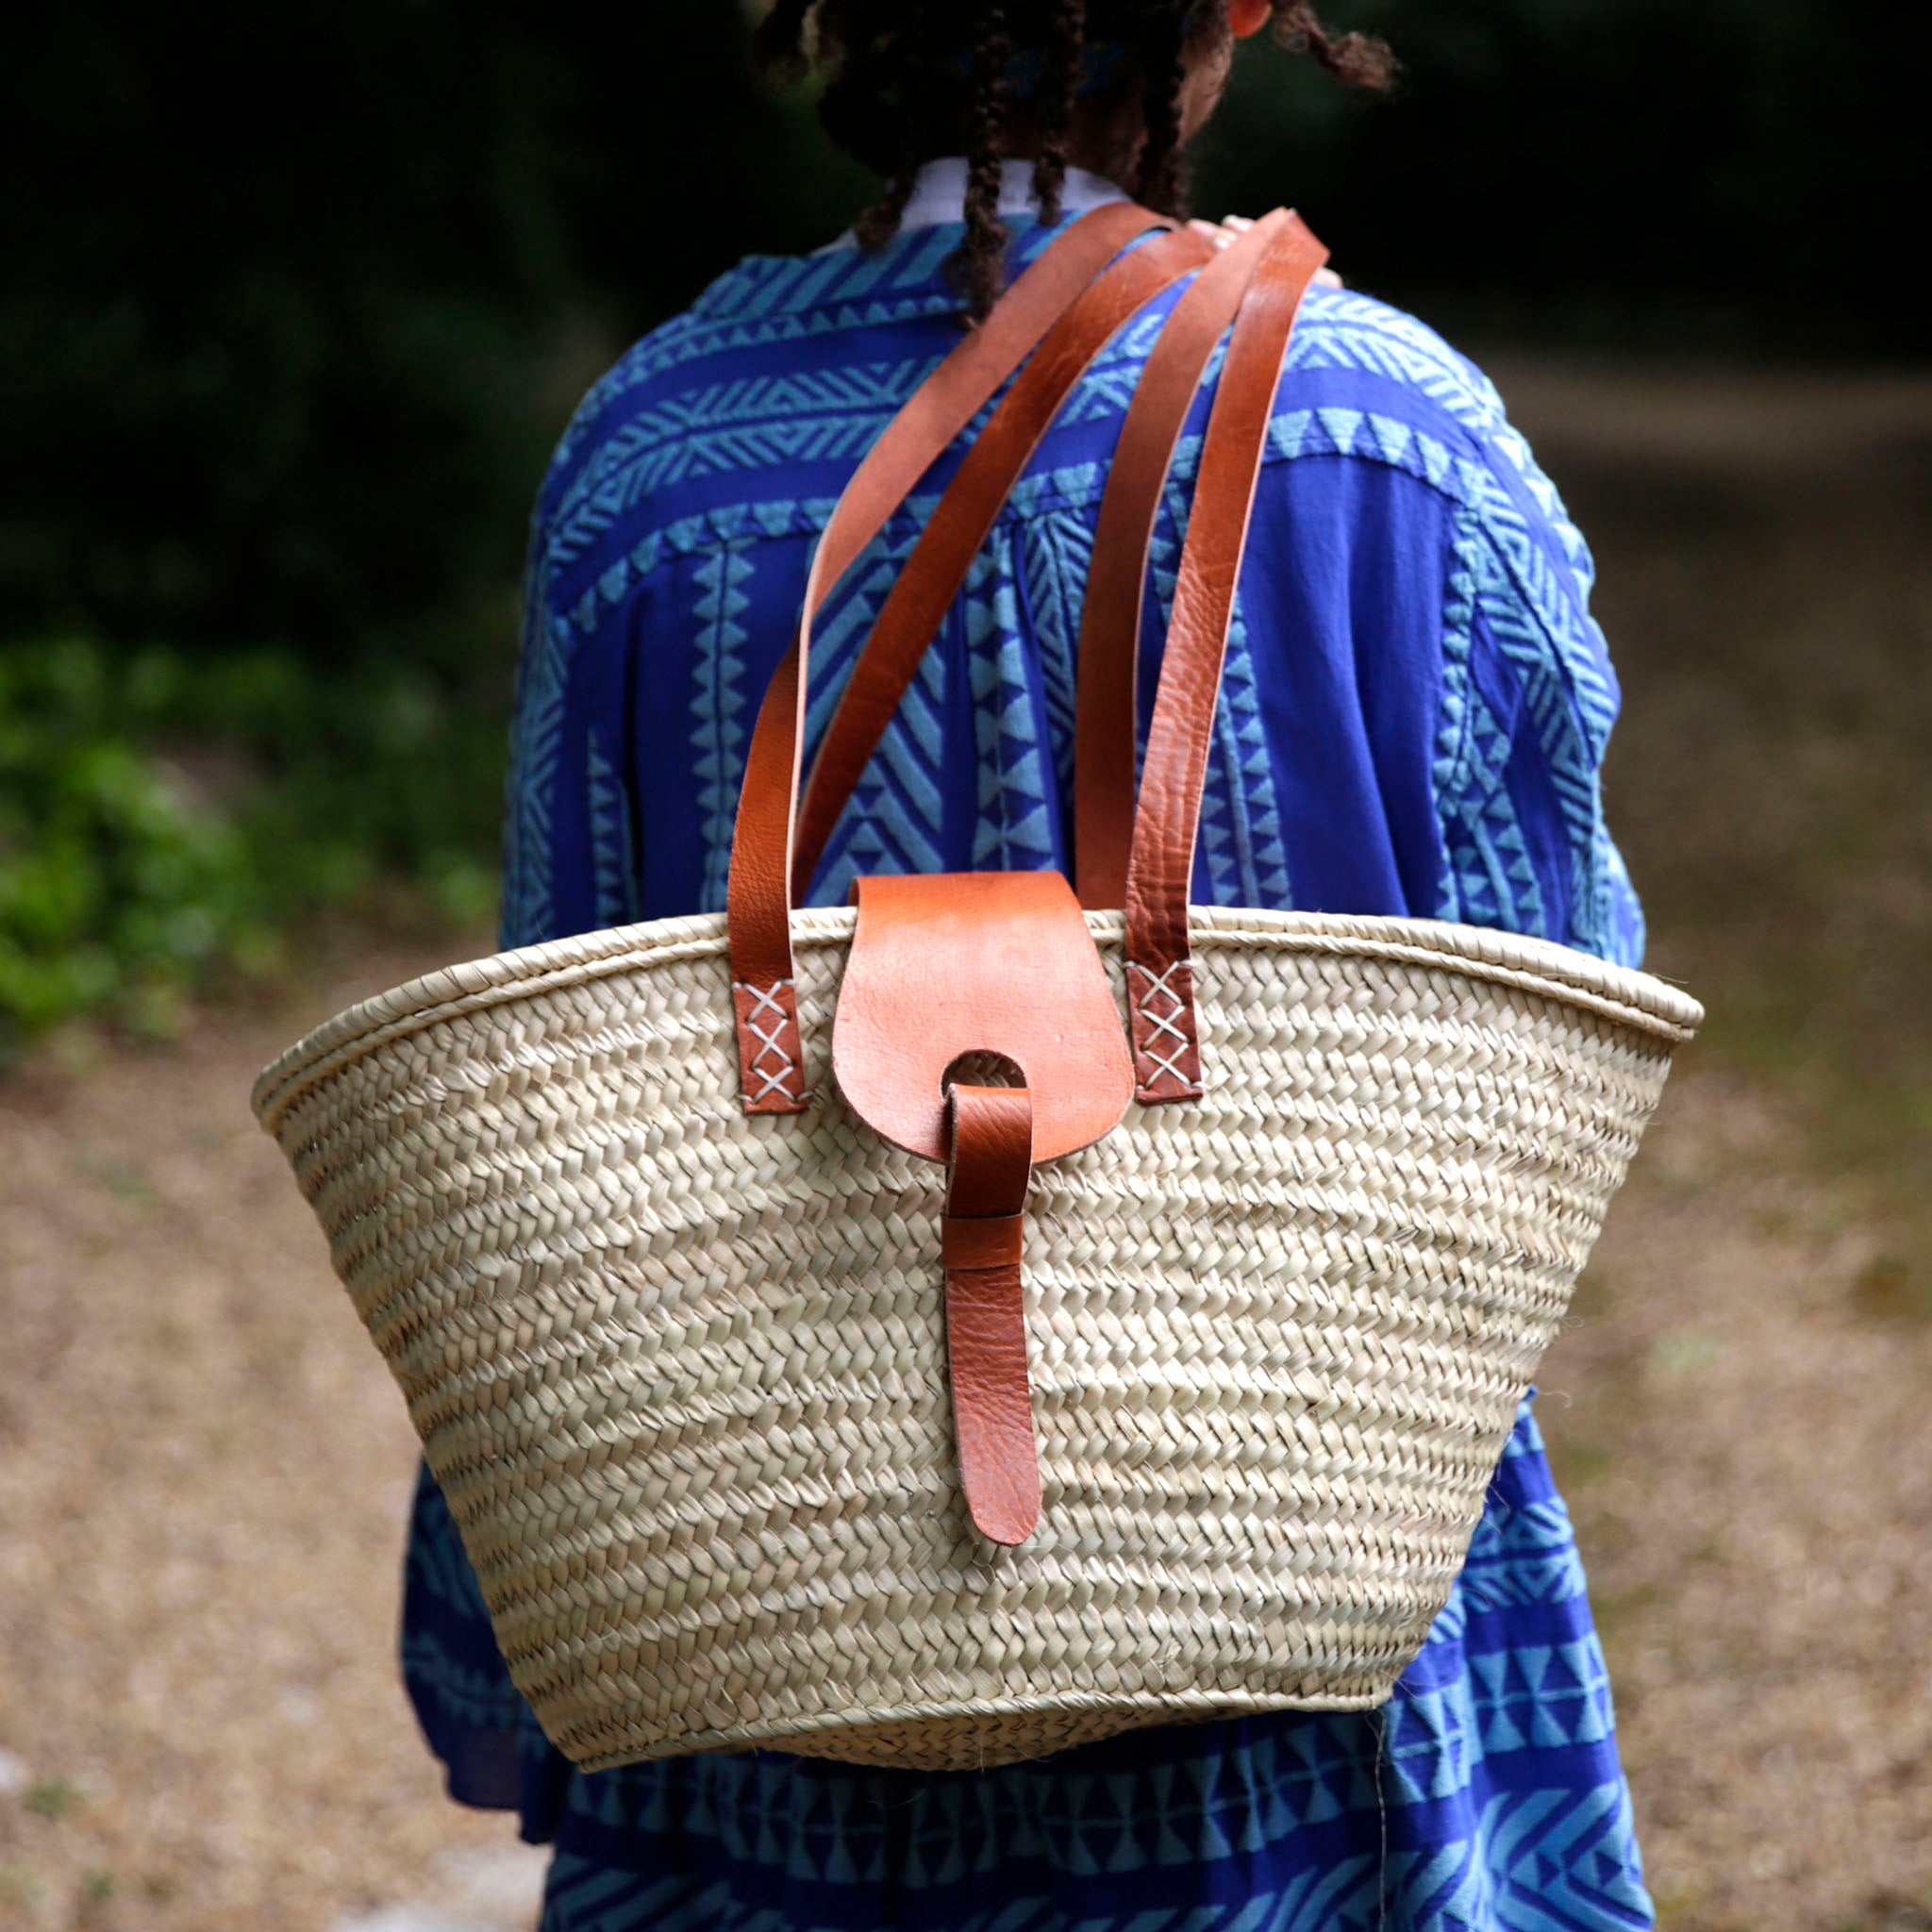  FRENCH BASKET straw bag with leather handles, beach bag, straw  bag, market basket, shopping basket, wicker basket with handle, wicker  basket : Handmade Products